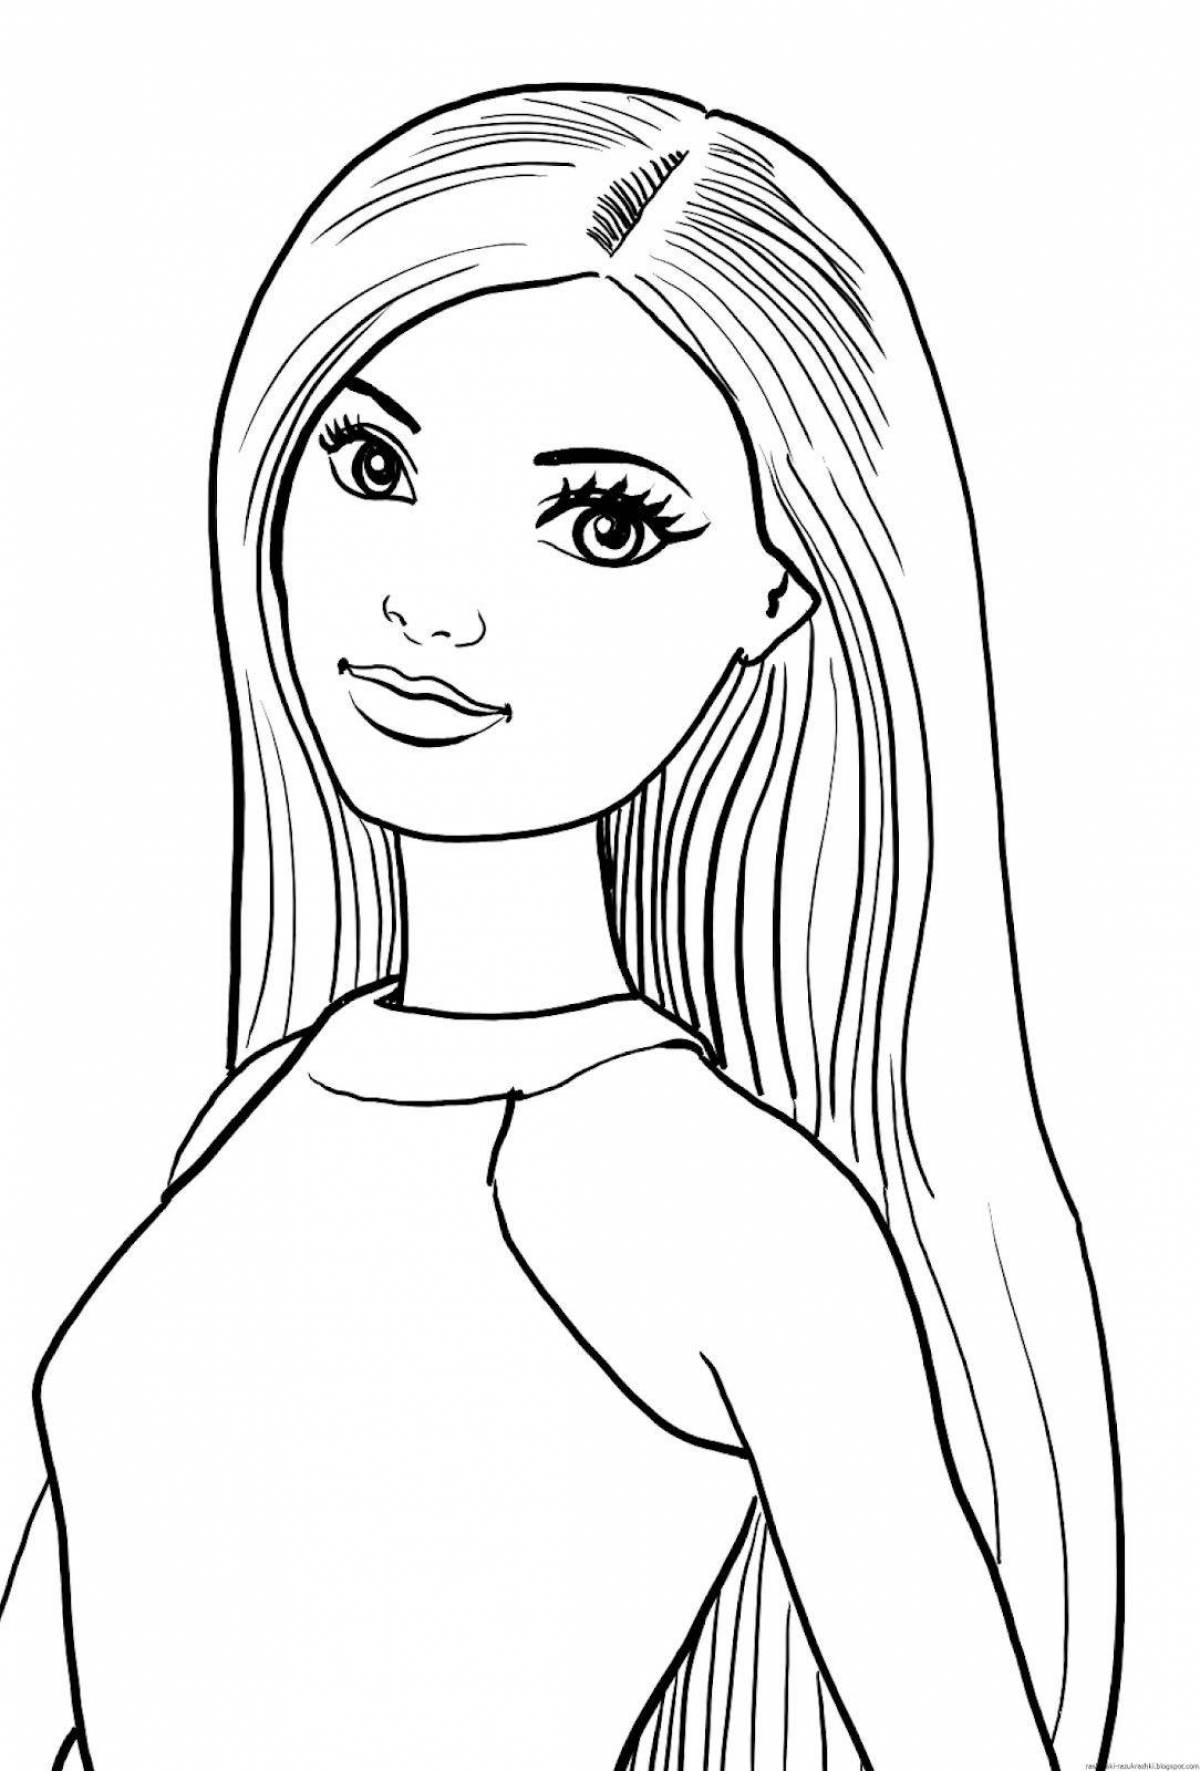 Spicy barbie face coloring page